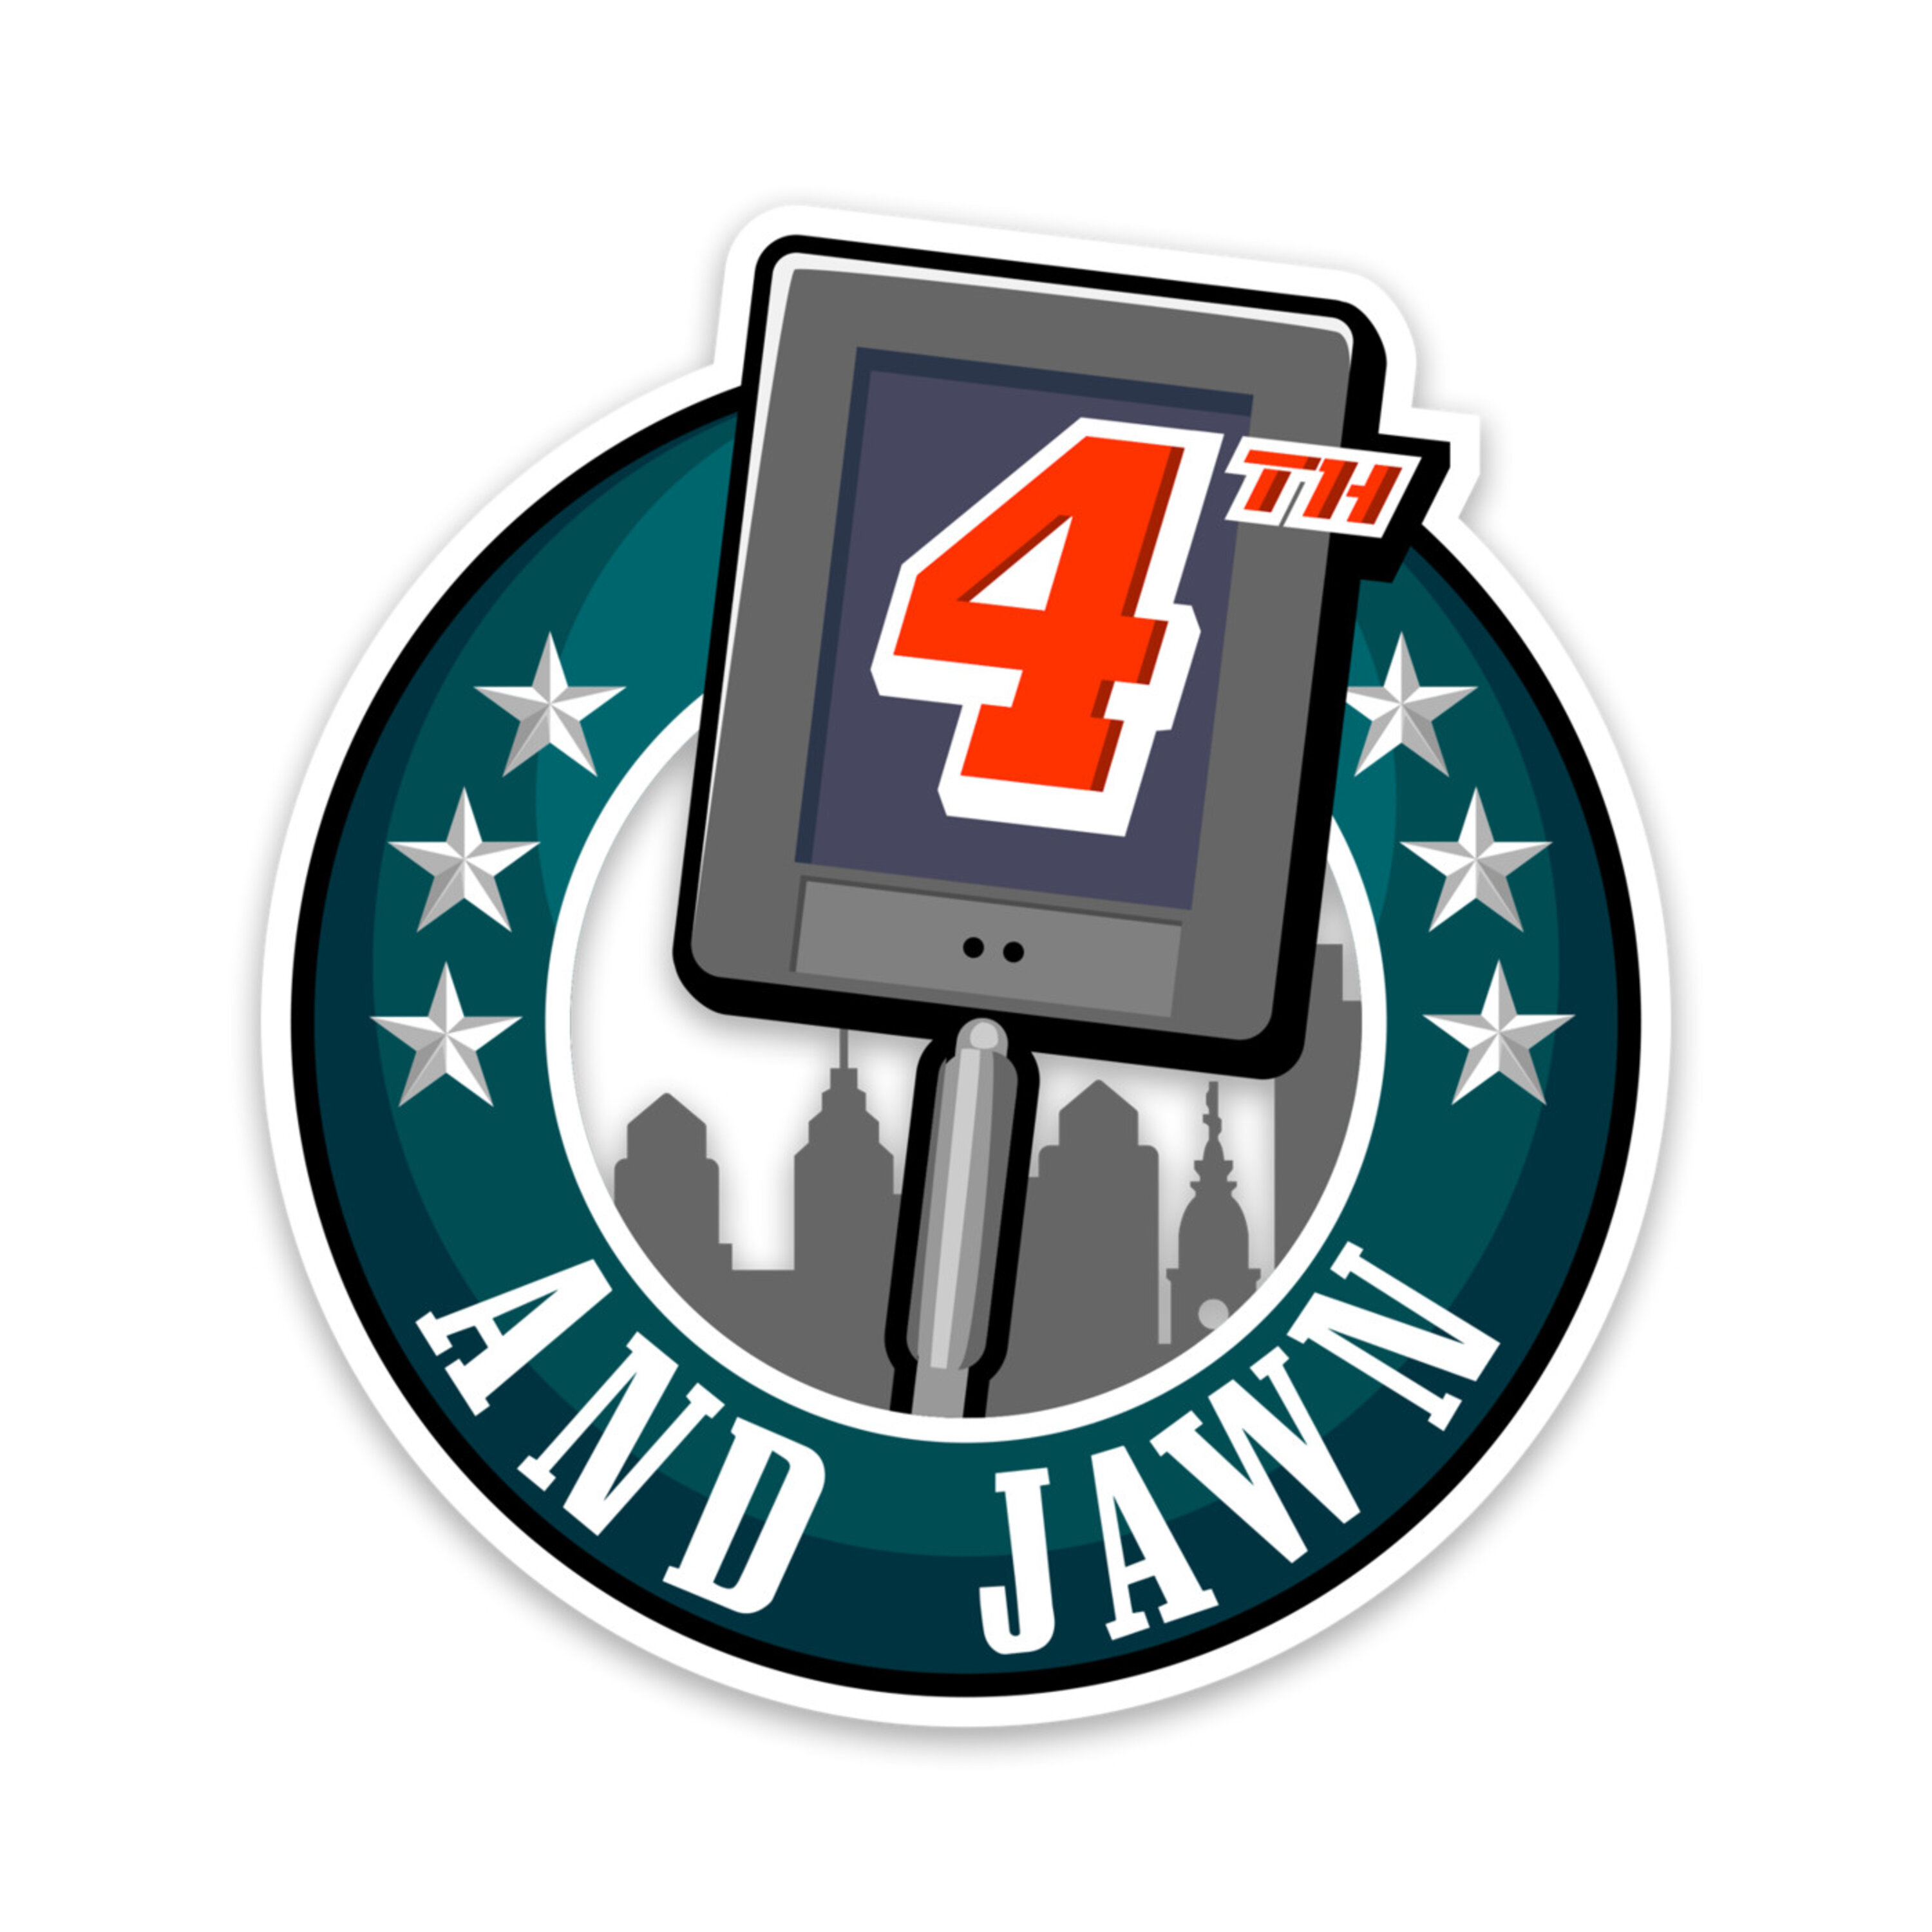 4th and Jawn - Episode 262 - 5 Things To Get Back To The Super Bowl